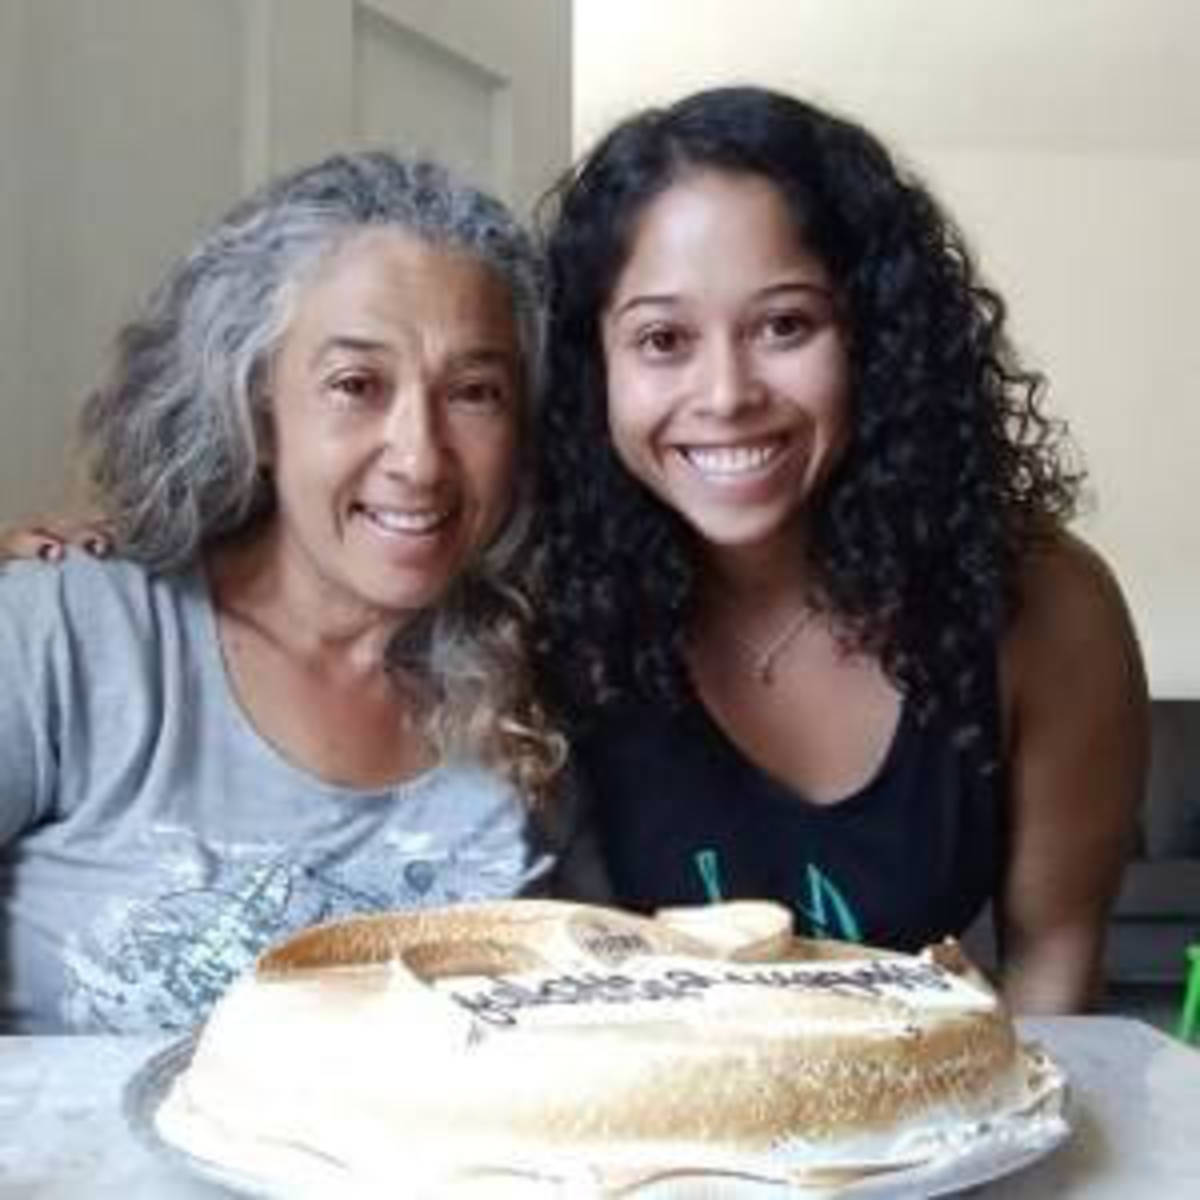 Erika, right, and her mother, Maria.